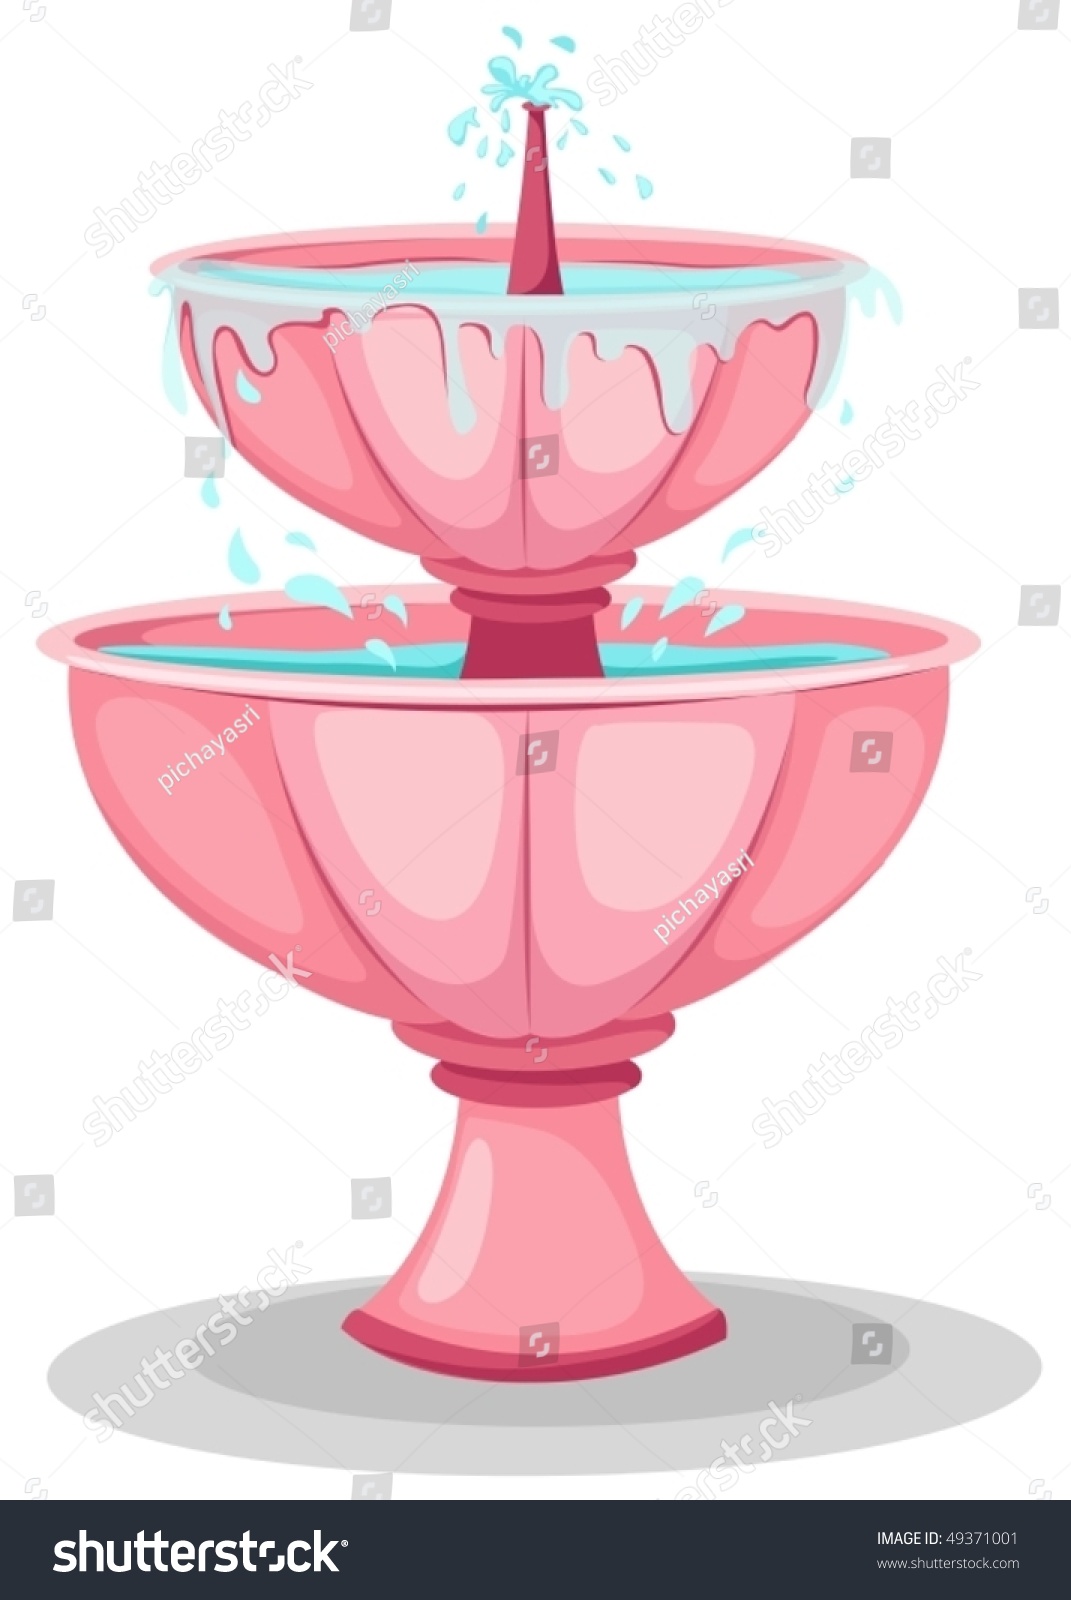 Illustration Of Isolated Cartoon Fountain On White Background